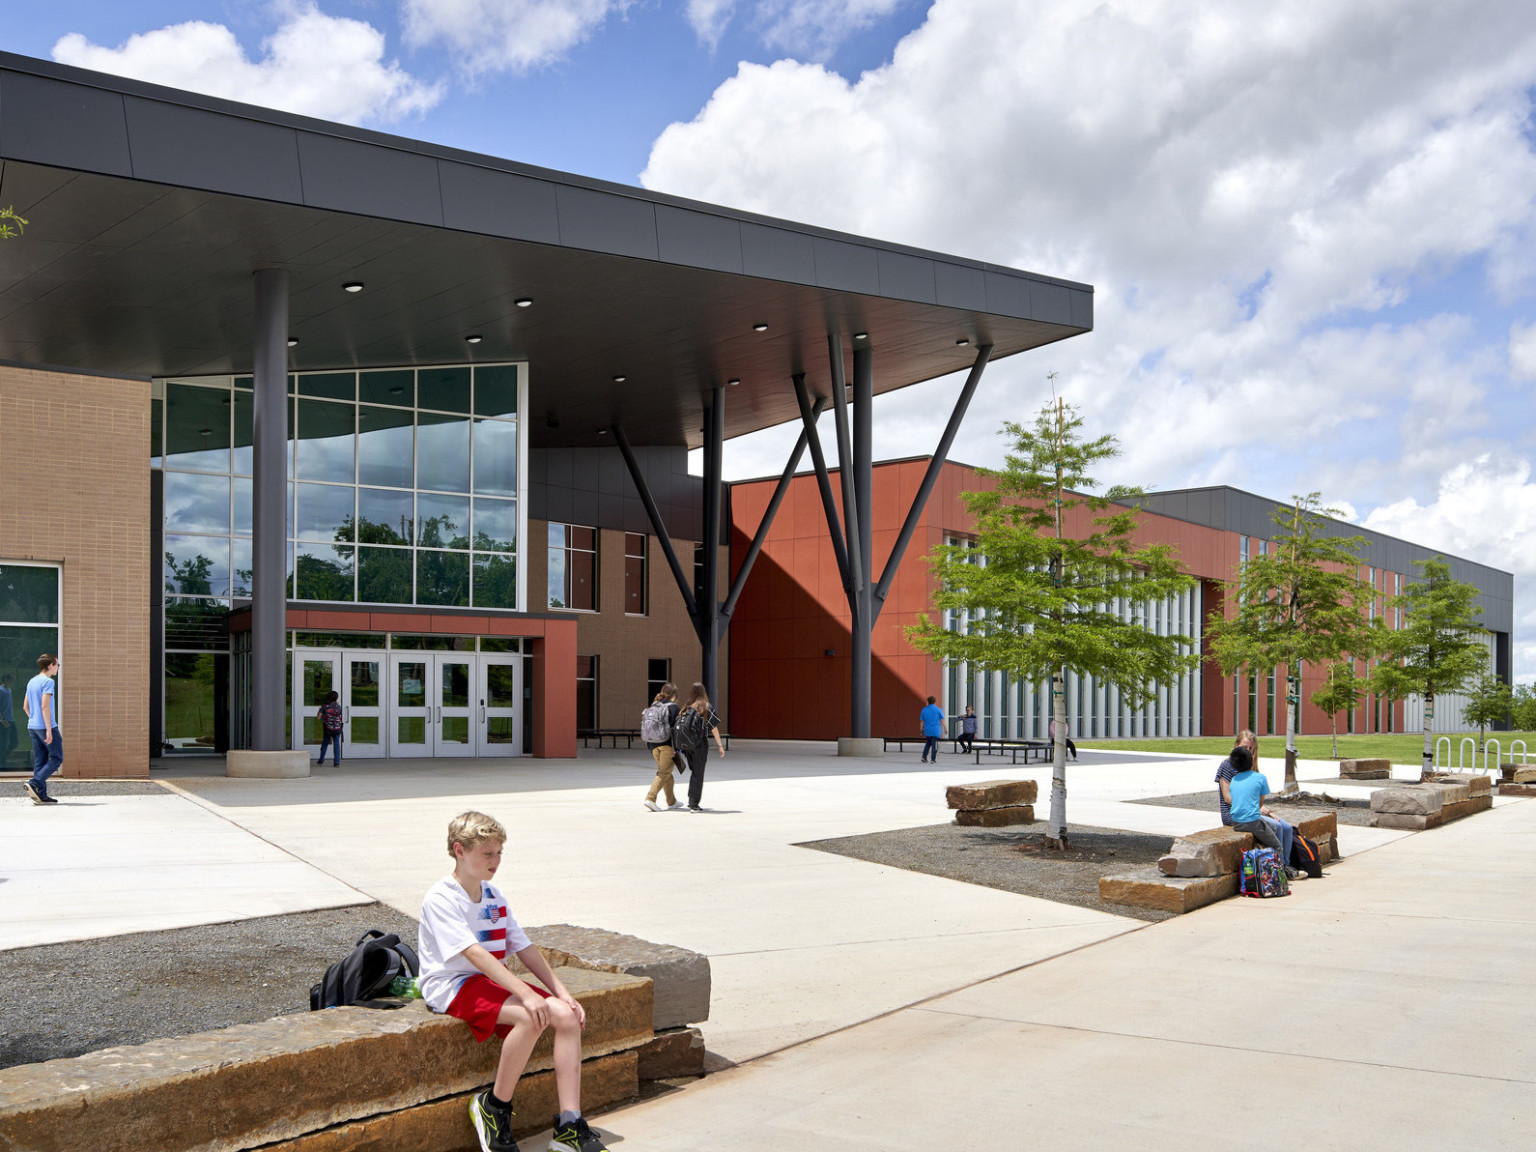 Capps Middle School front entry with angled black shelter over double height glass lobby. Stone benches. Orange wrap facade